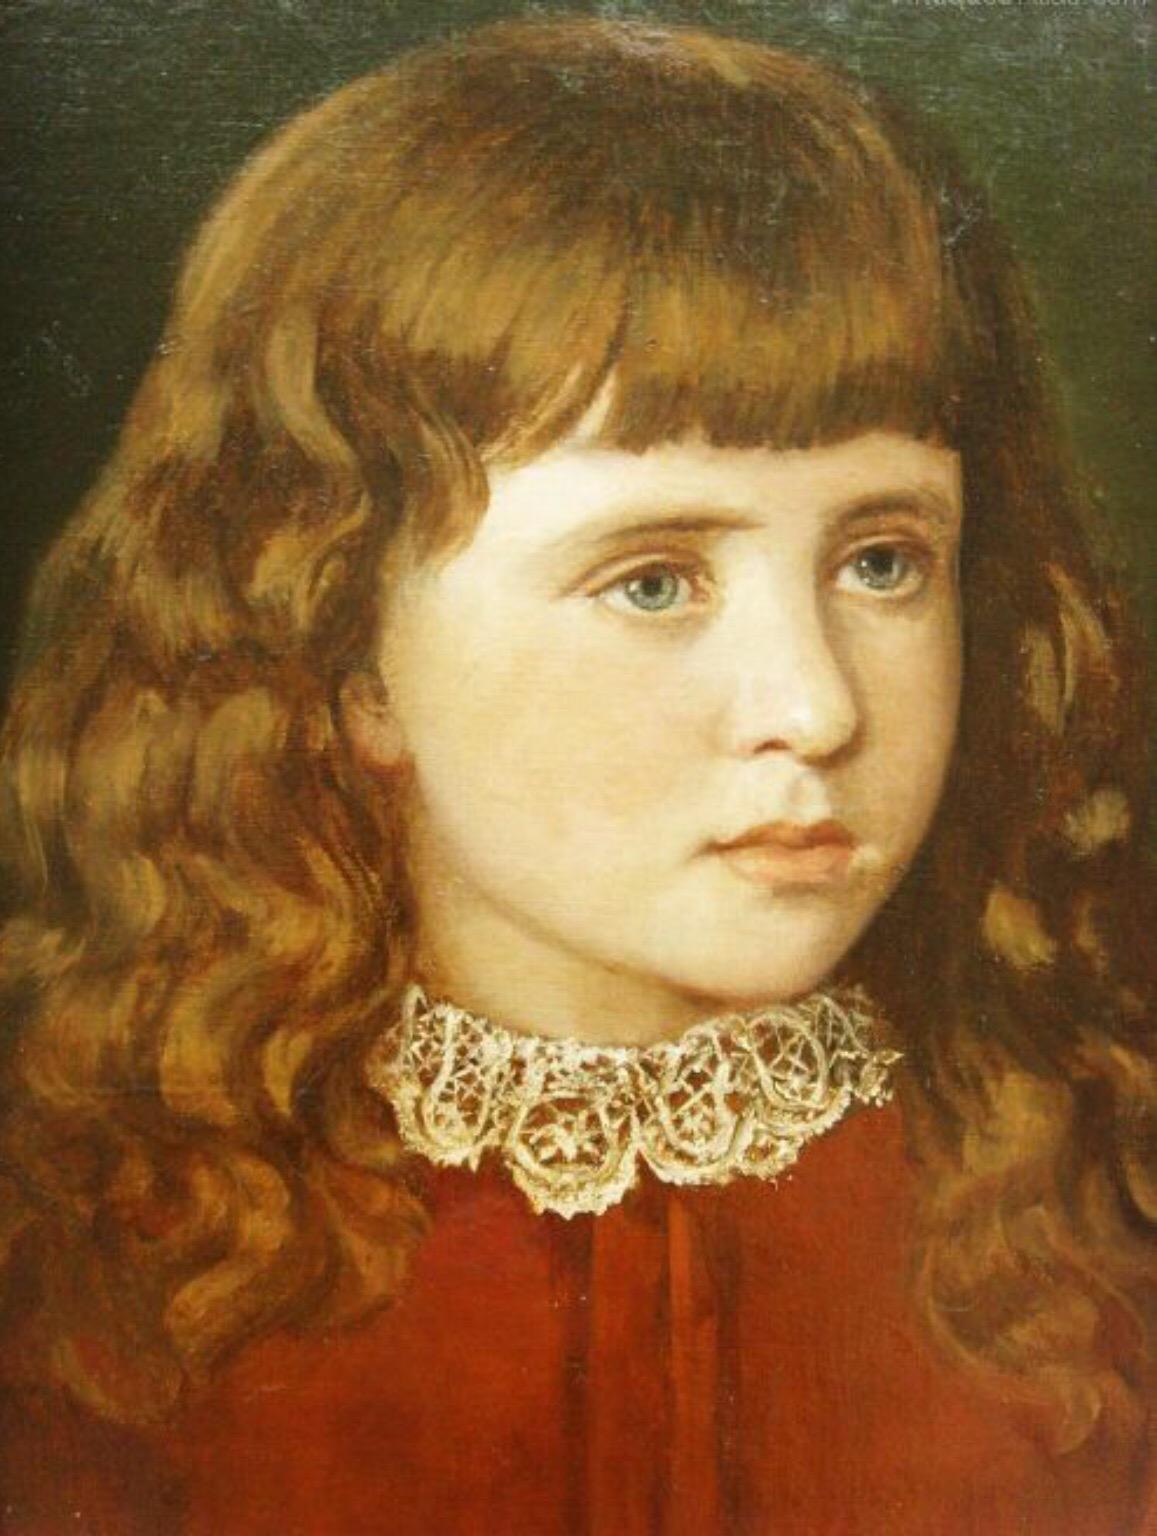 We are pleased to offer for sale this rather beautiful Victorian oil painting of a pretty young girl of around ten years of age, who looks towards the artist with concentration and serious expression.

She has a fringe, long mid brown wavy hair and